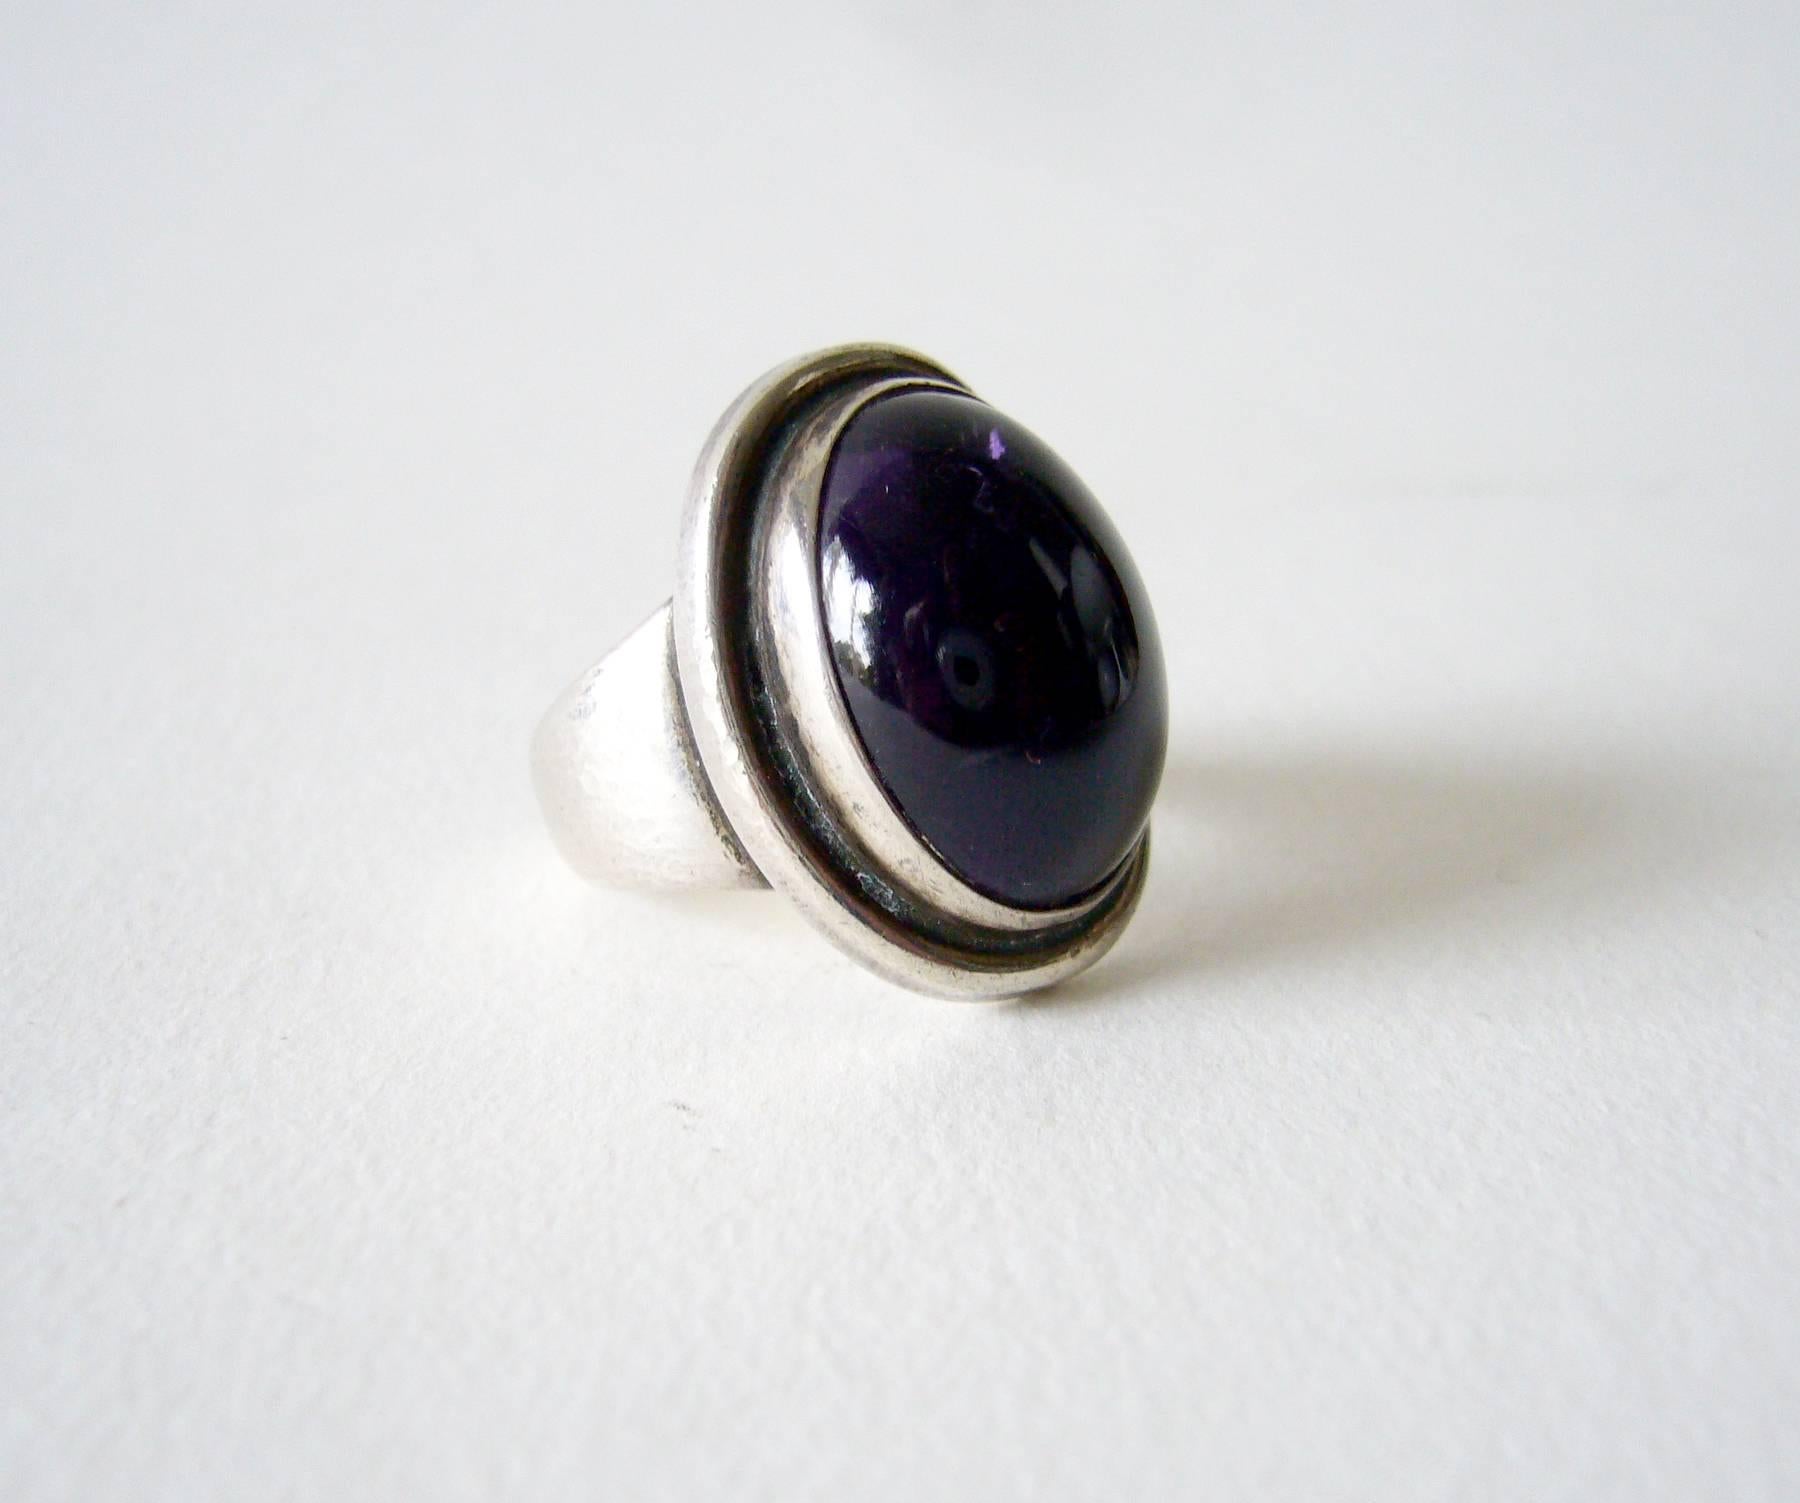 Hammered finish amethyst and sterling silver 48A ring designed by Harald Nielsen for Georg Jensen.  Ring is a finger size 4.5 -4.75 and is signed Georg Jensen, 46A, Denmark.  In very good vintage condition.